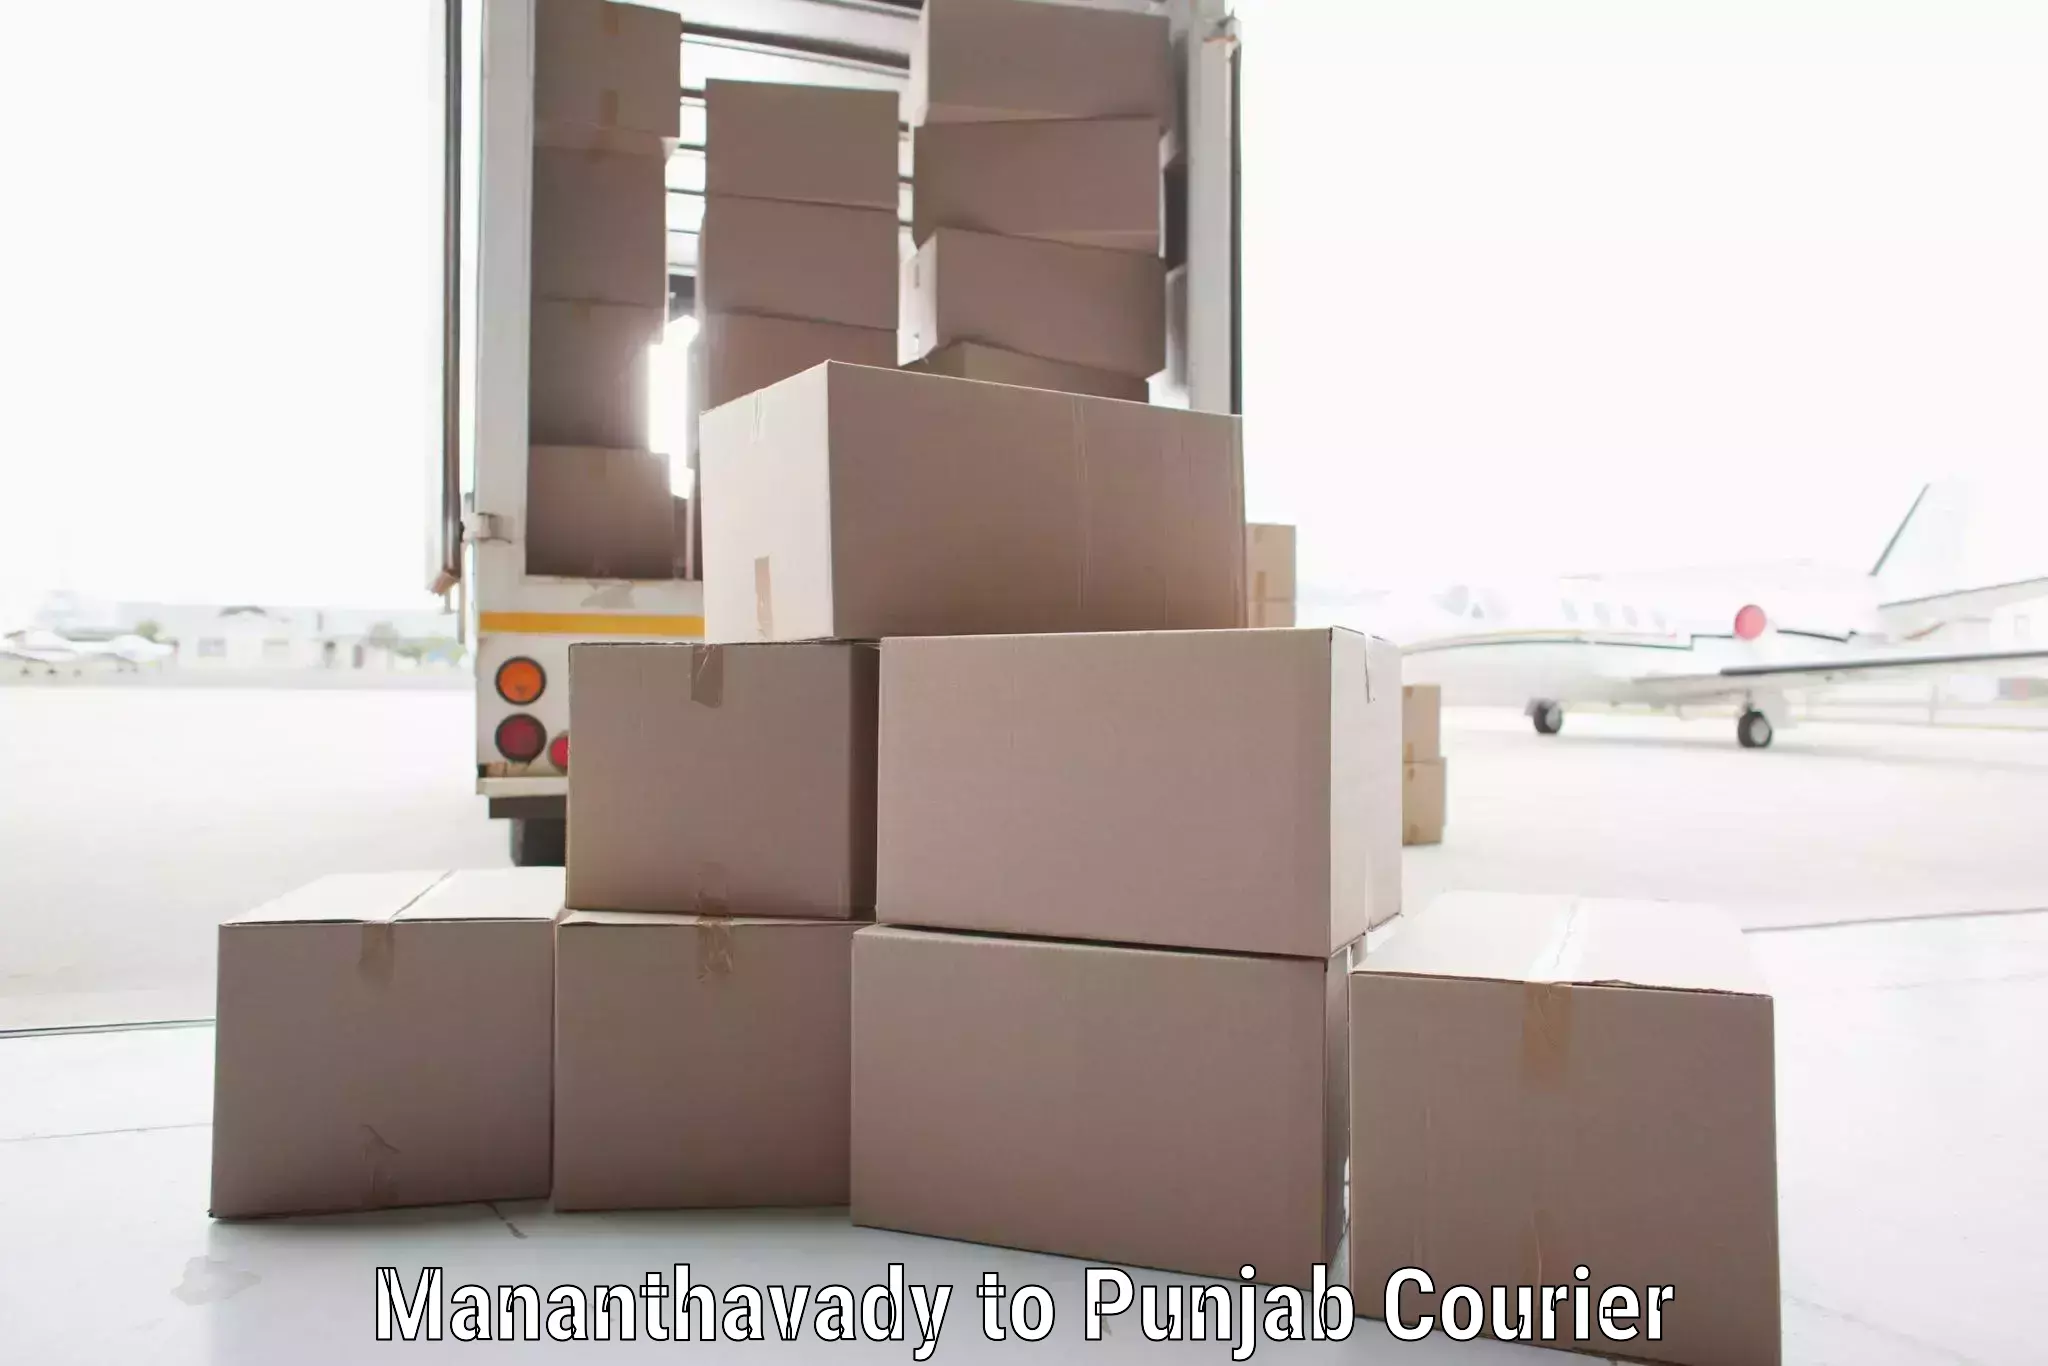 Comprehensive shipping network Mananthavady to Zirakpur